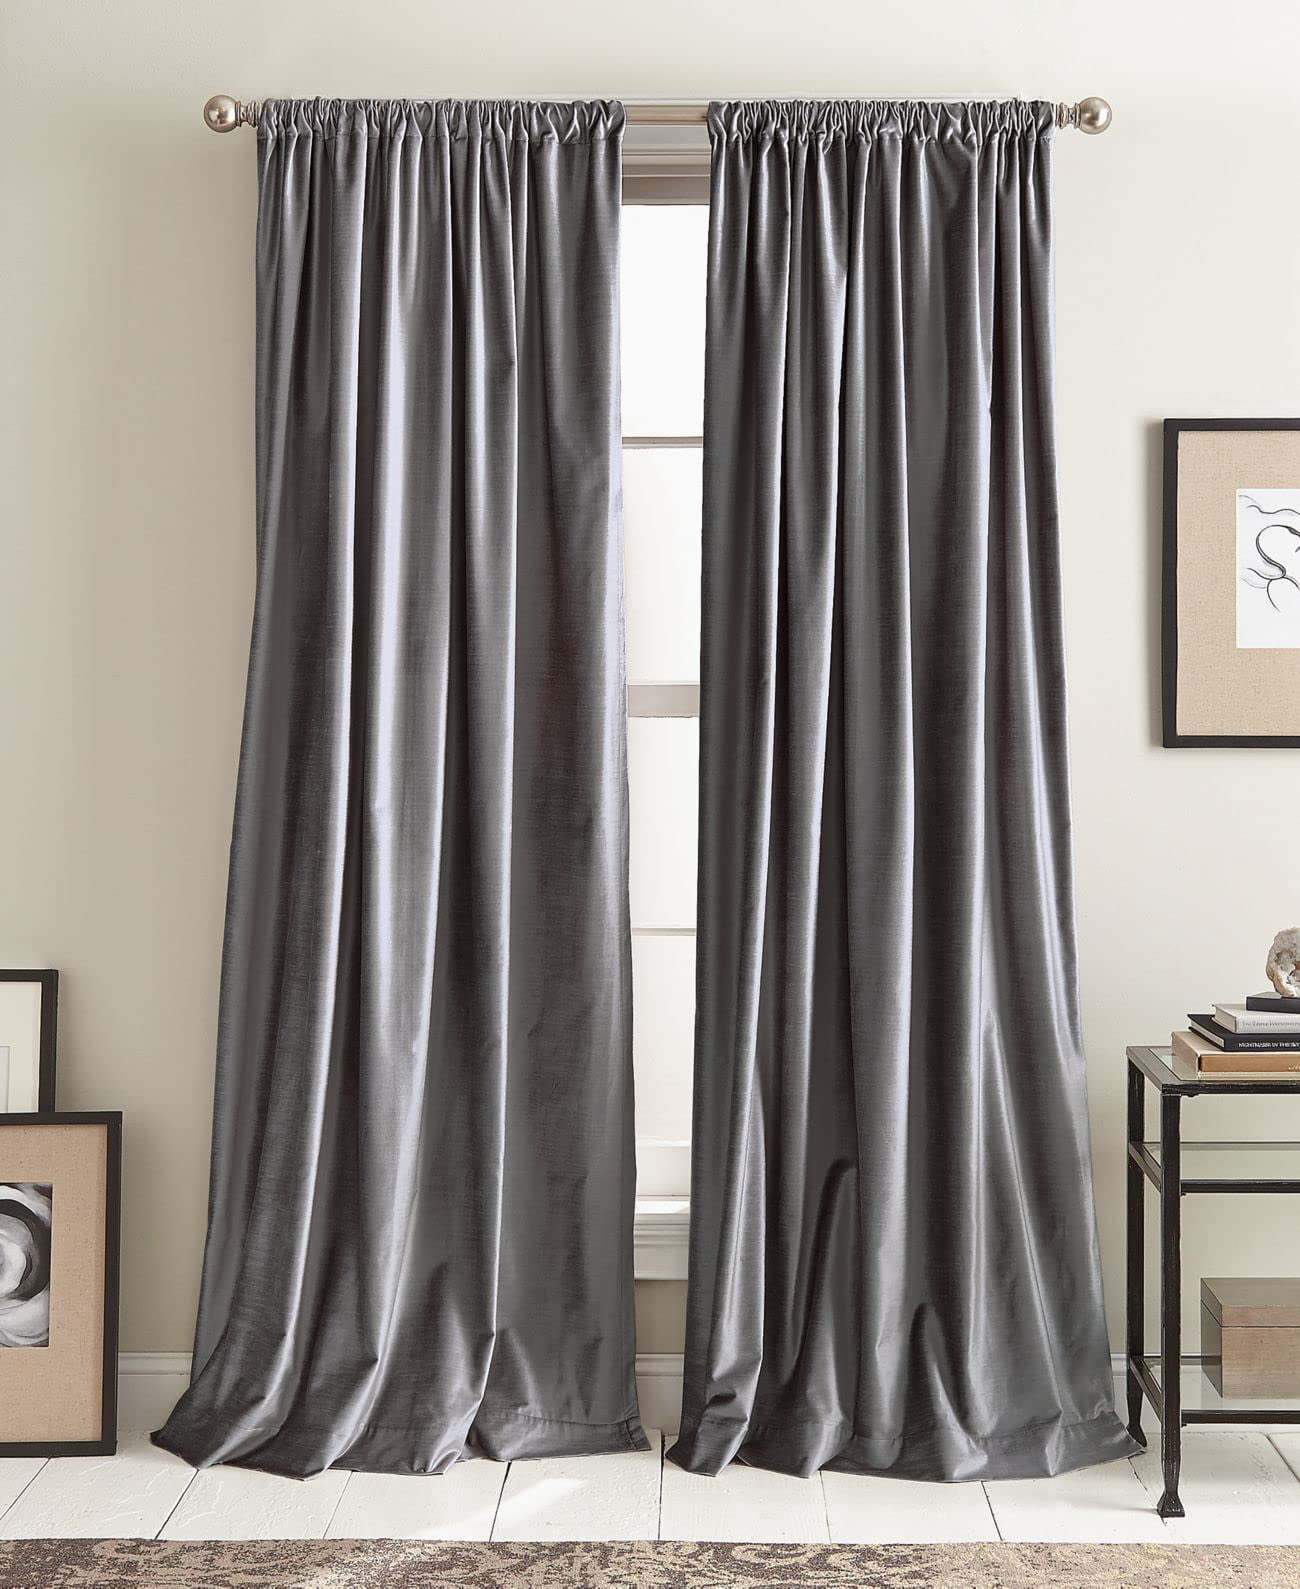 DKNY Modern Knotted Velvet Lined Curtain Panel Pair, Gray, 108-inch Panel  Pair 